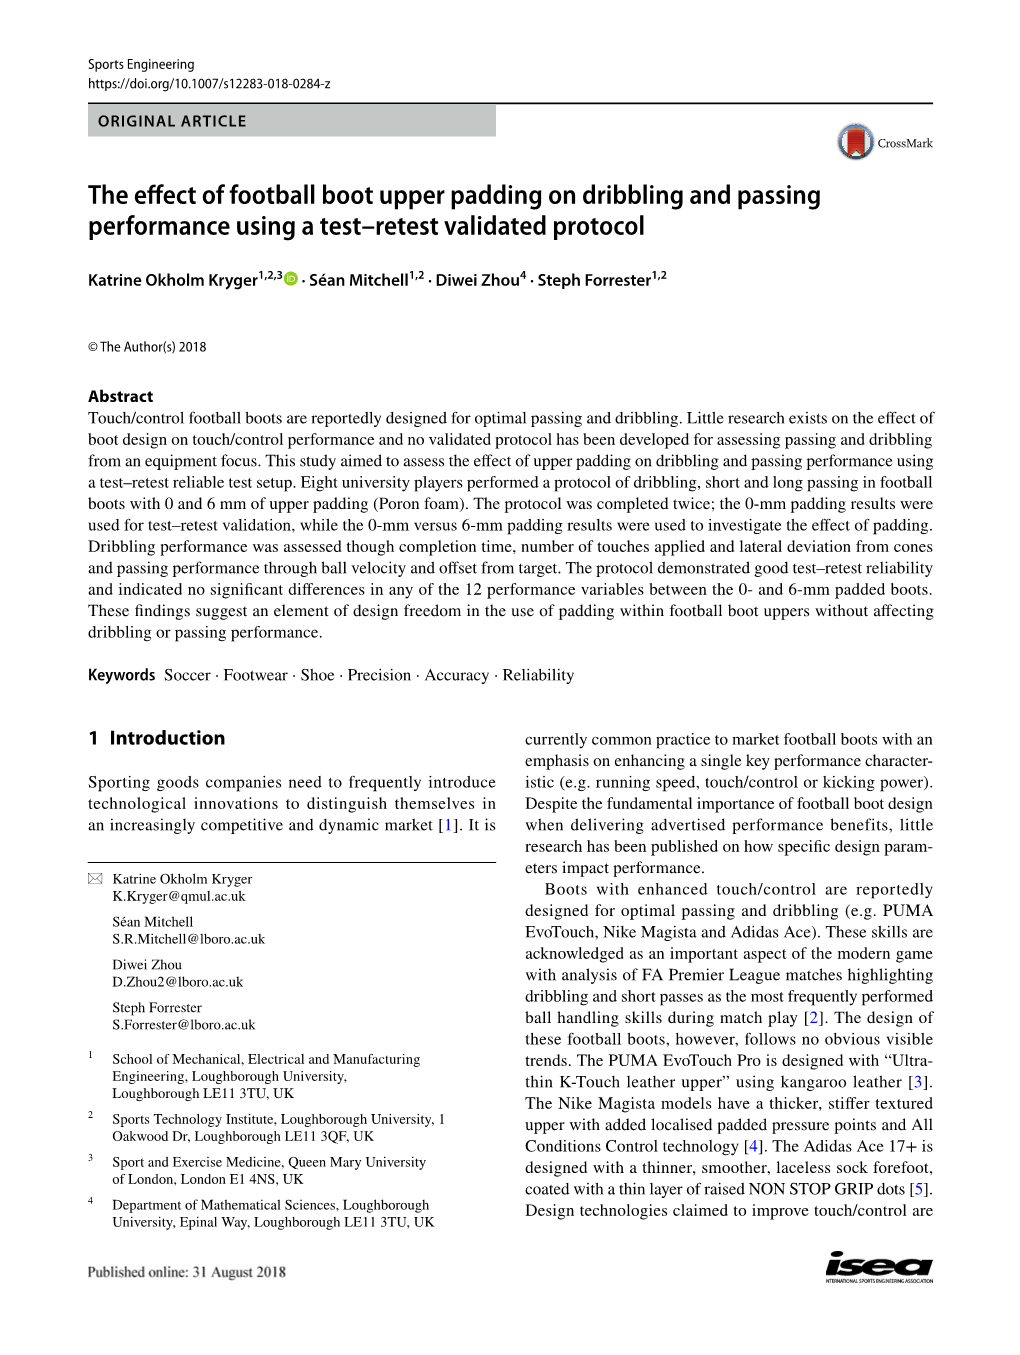 The Effect of Football Boot Upper Padding on Dribbling and Passing Performance Using a Test–Retest Validated Protocol